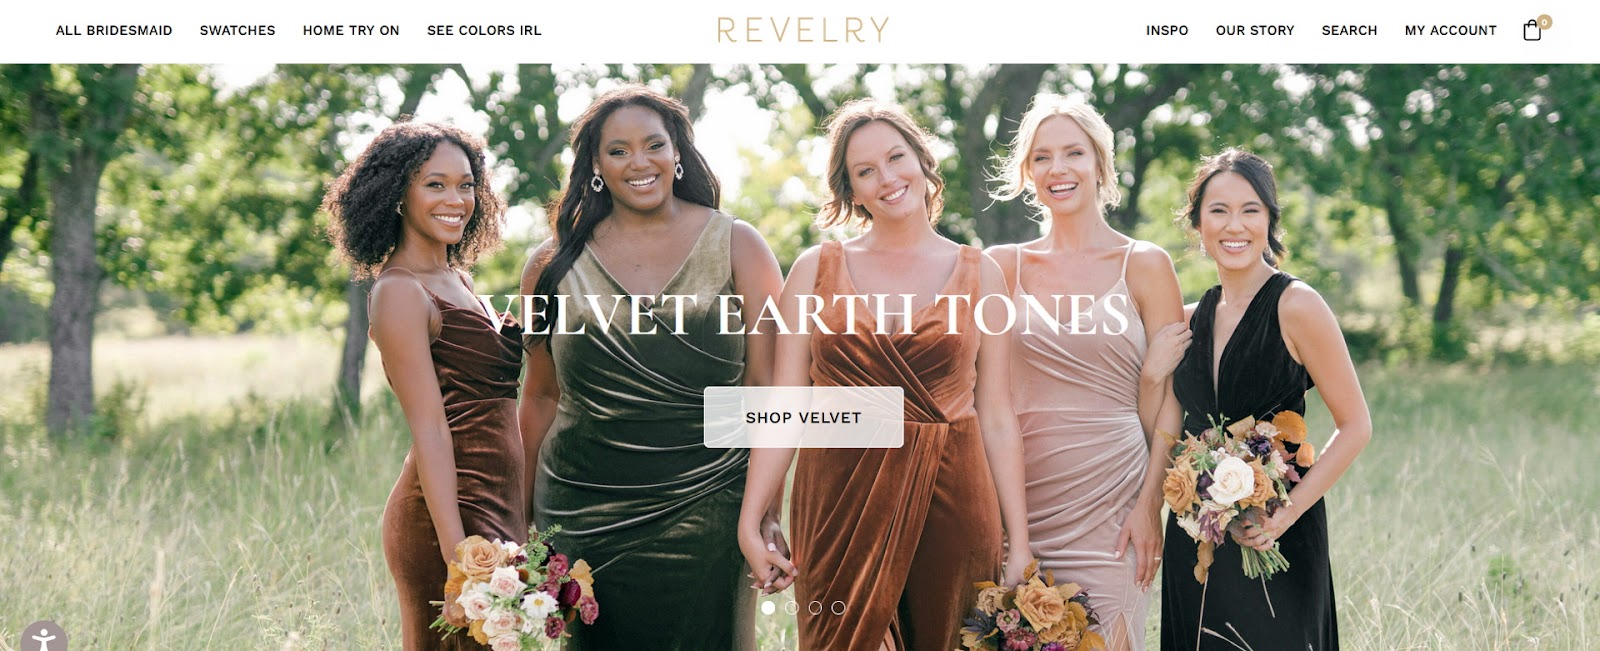 For example, Revelry sells bridesmaid dresses in numerous sizes, colors, and styles. Their homepage shows five women in varying sizes wearing different dresses against a visually-appealing background. 